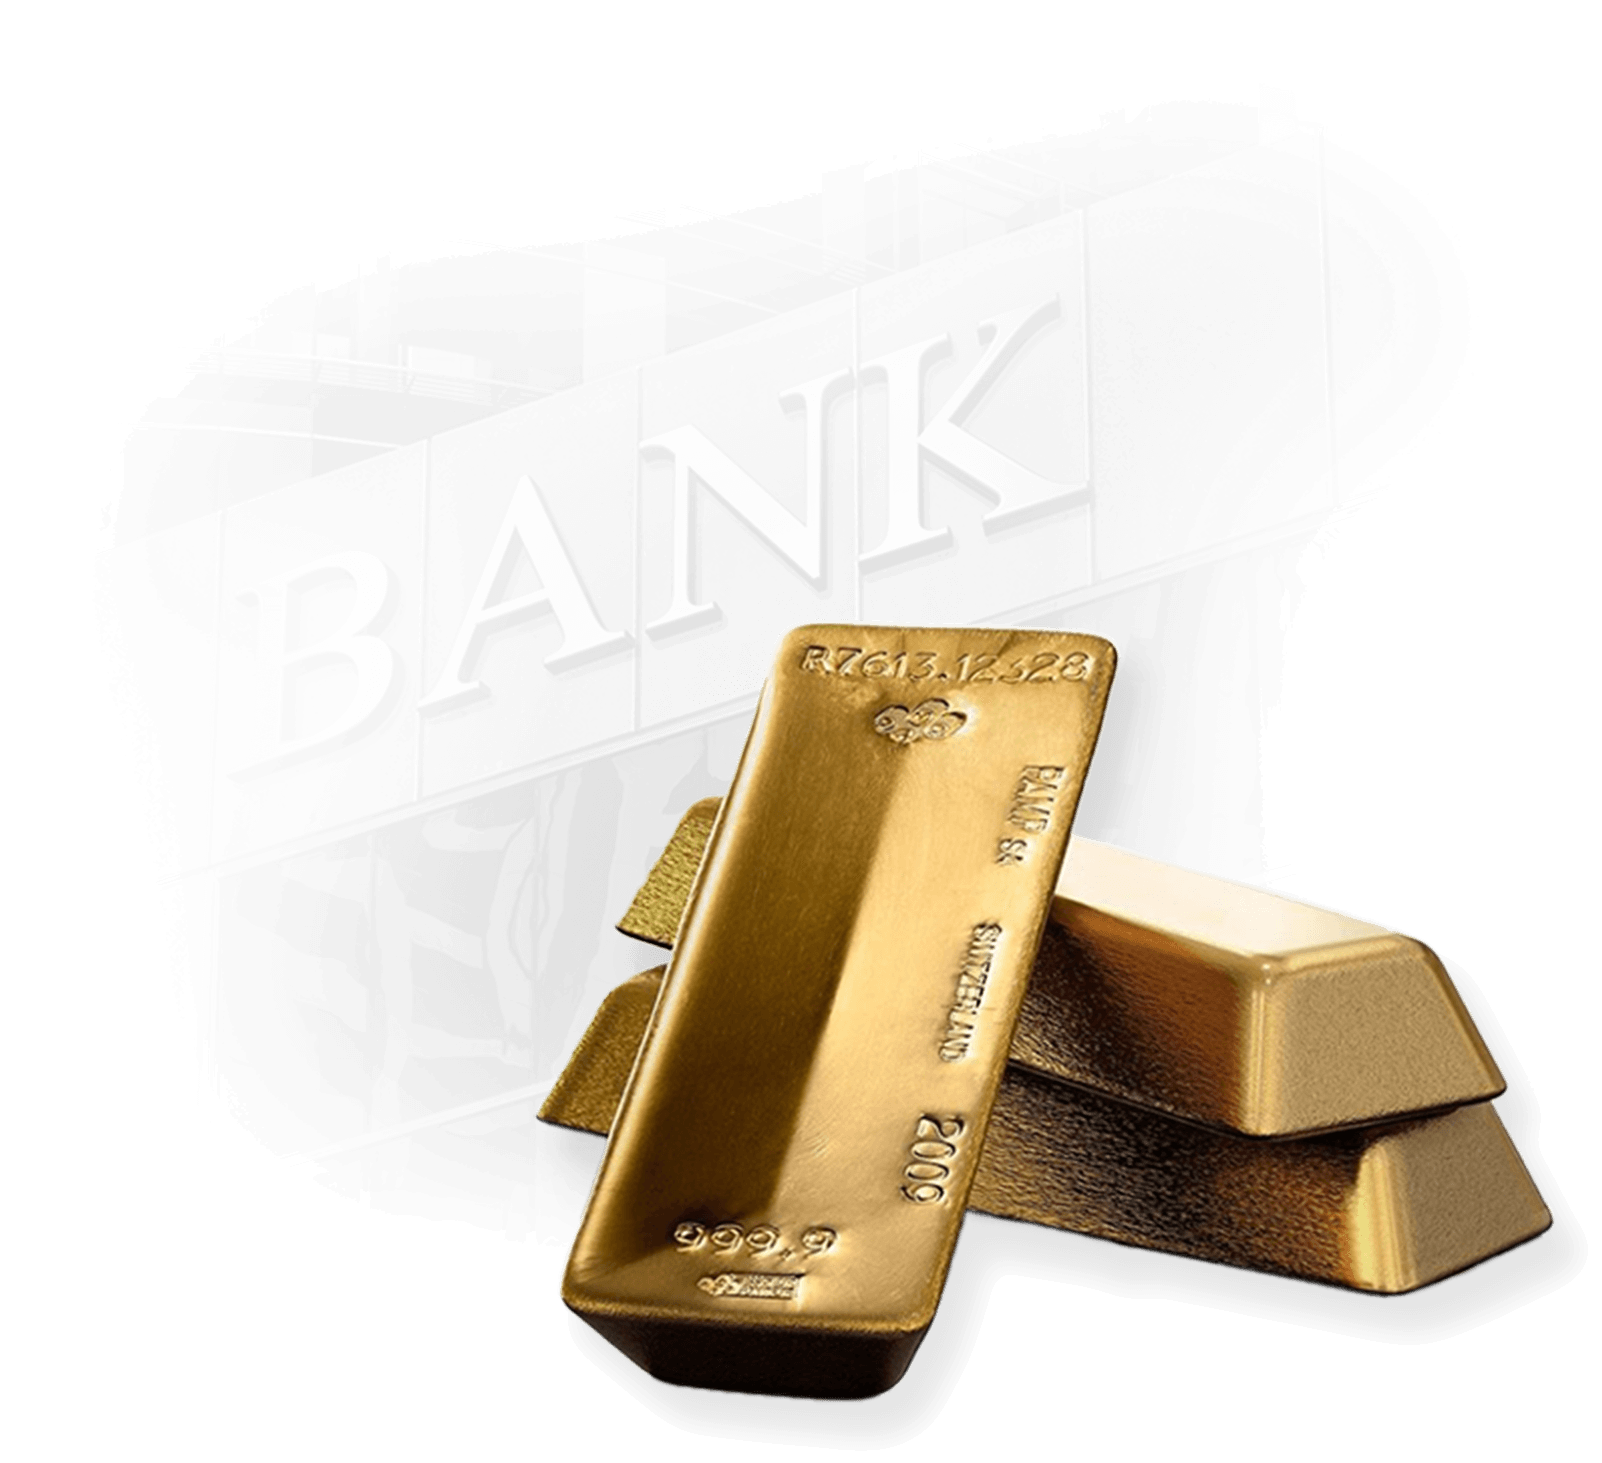 Central banks and gold